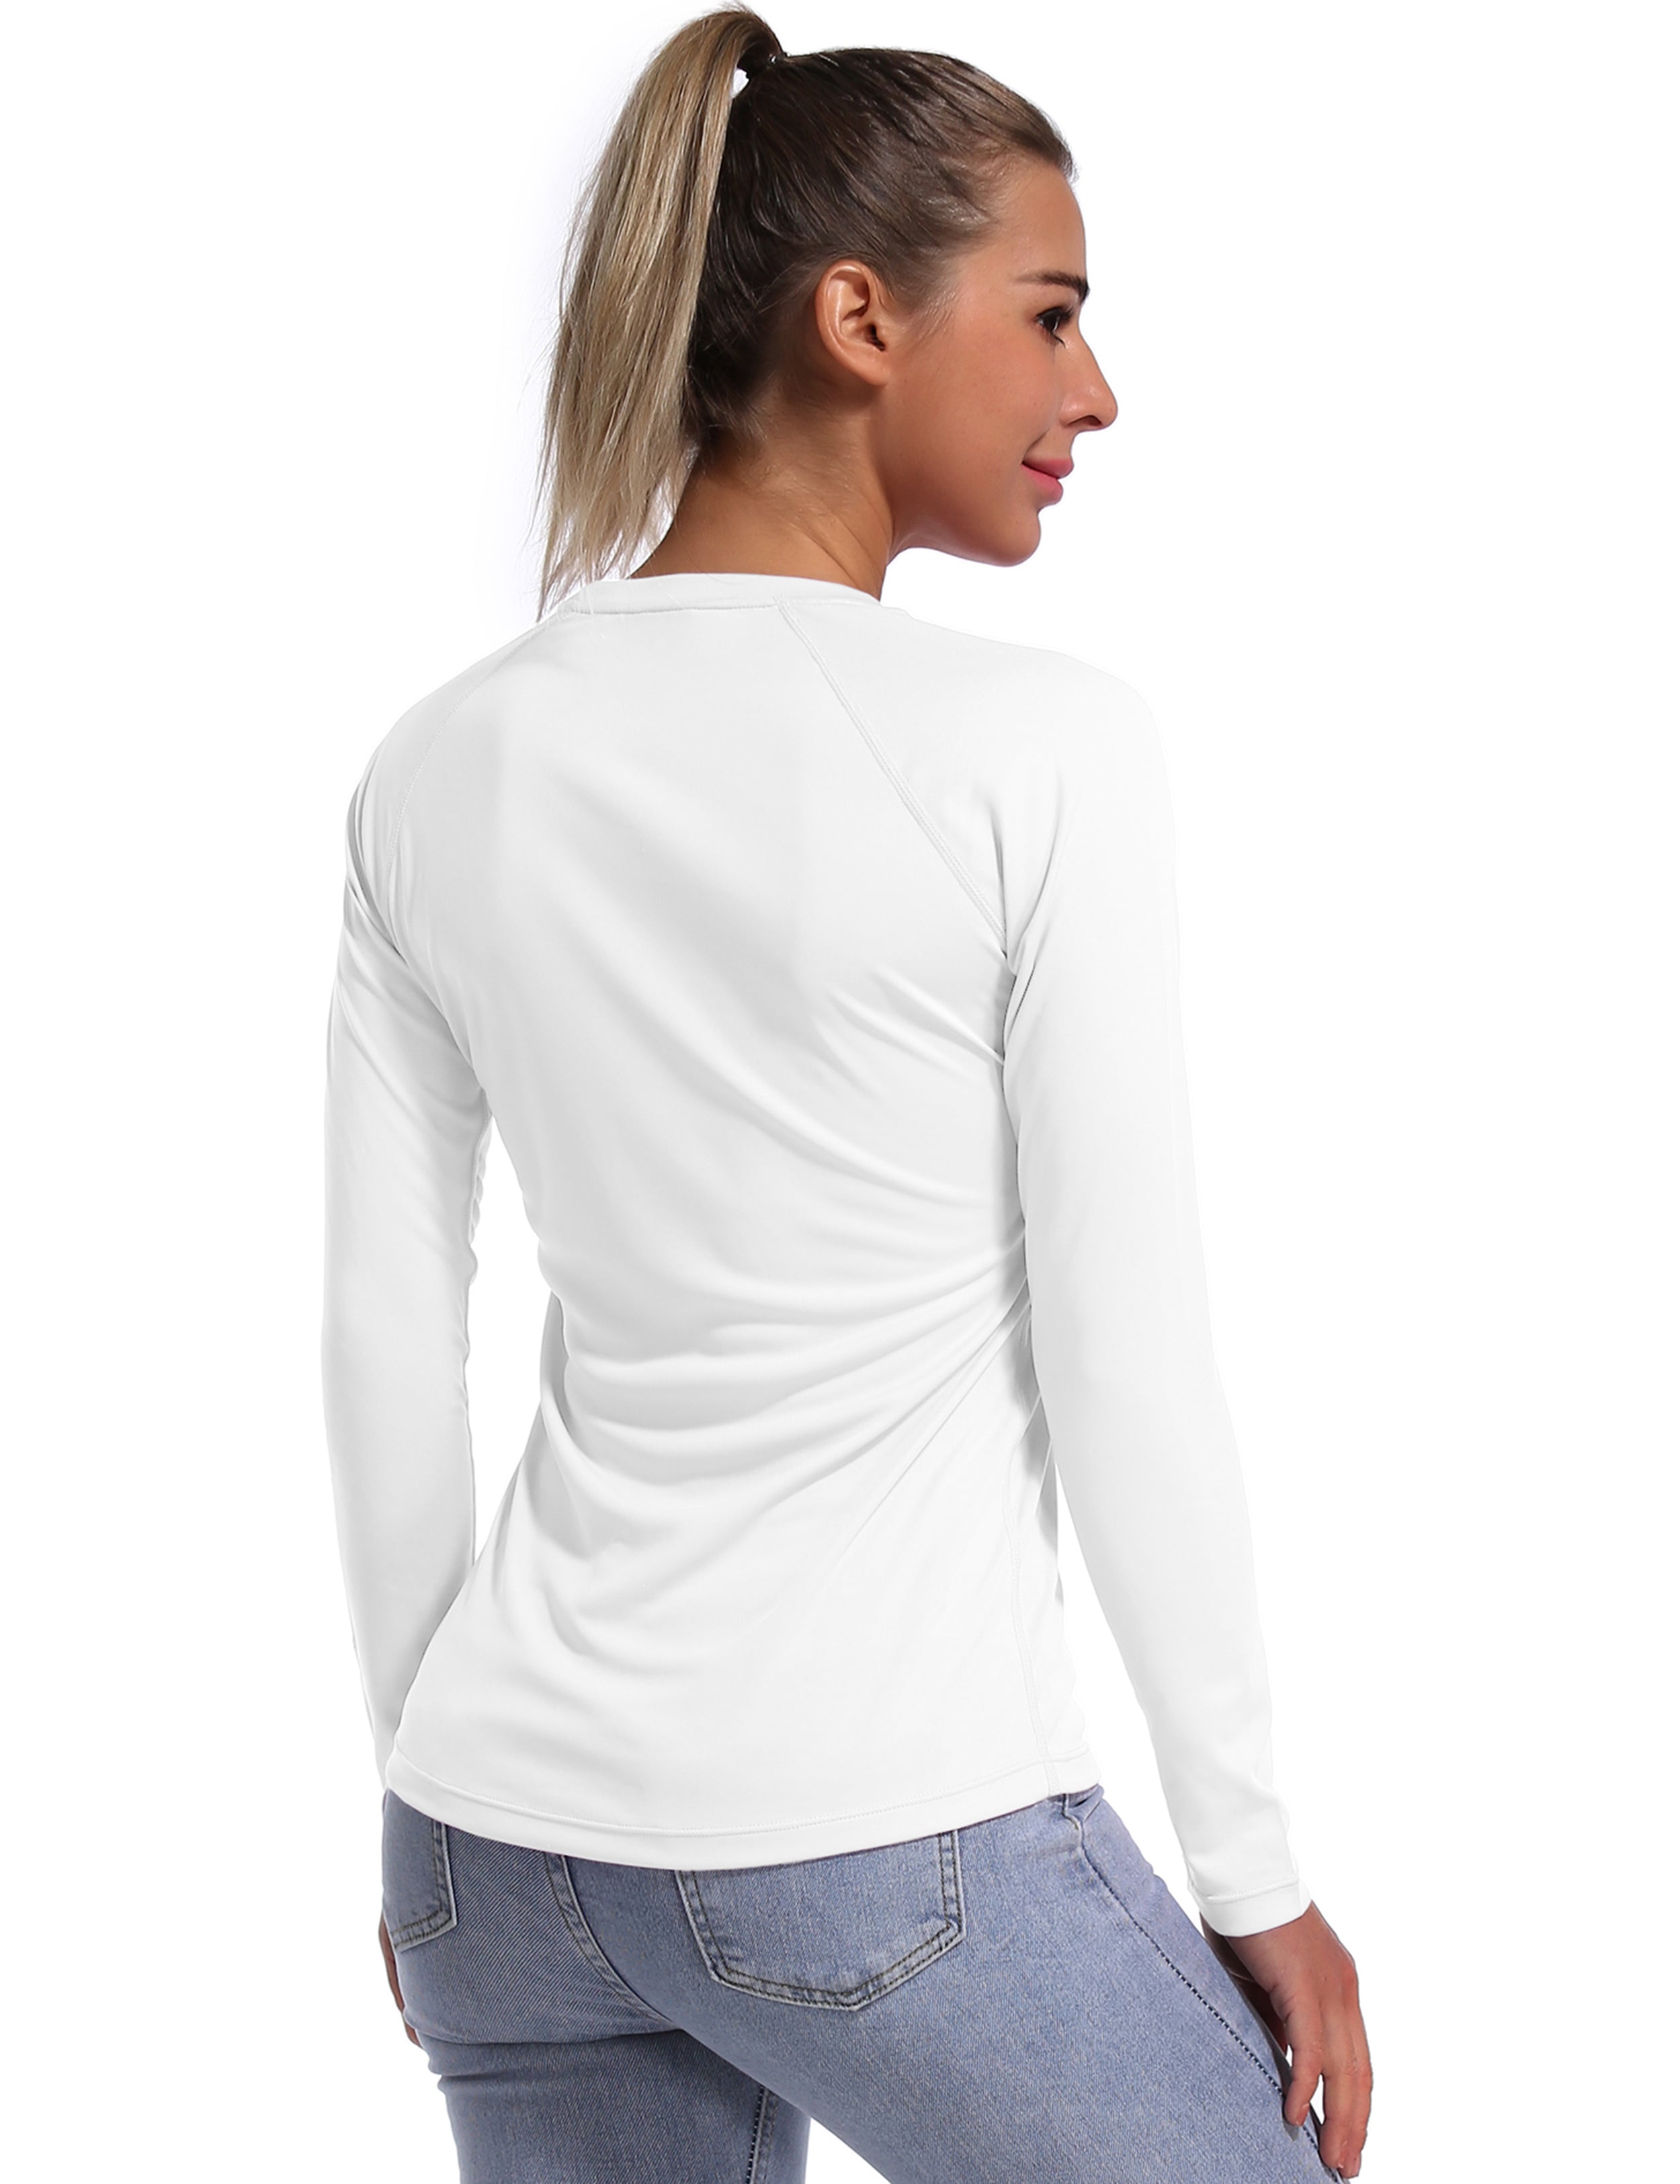 Long Sleeve Athletic Shirts white 100% polyester Lightweight Slim Fit UPF 50+ blocks sun's harmful rays Treated to wick moisture, dries ultra-fast